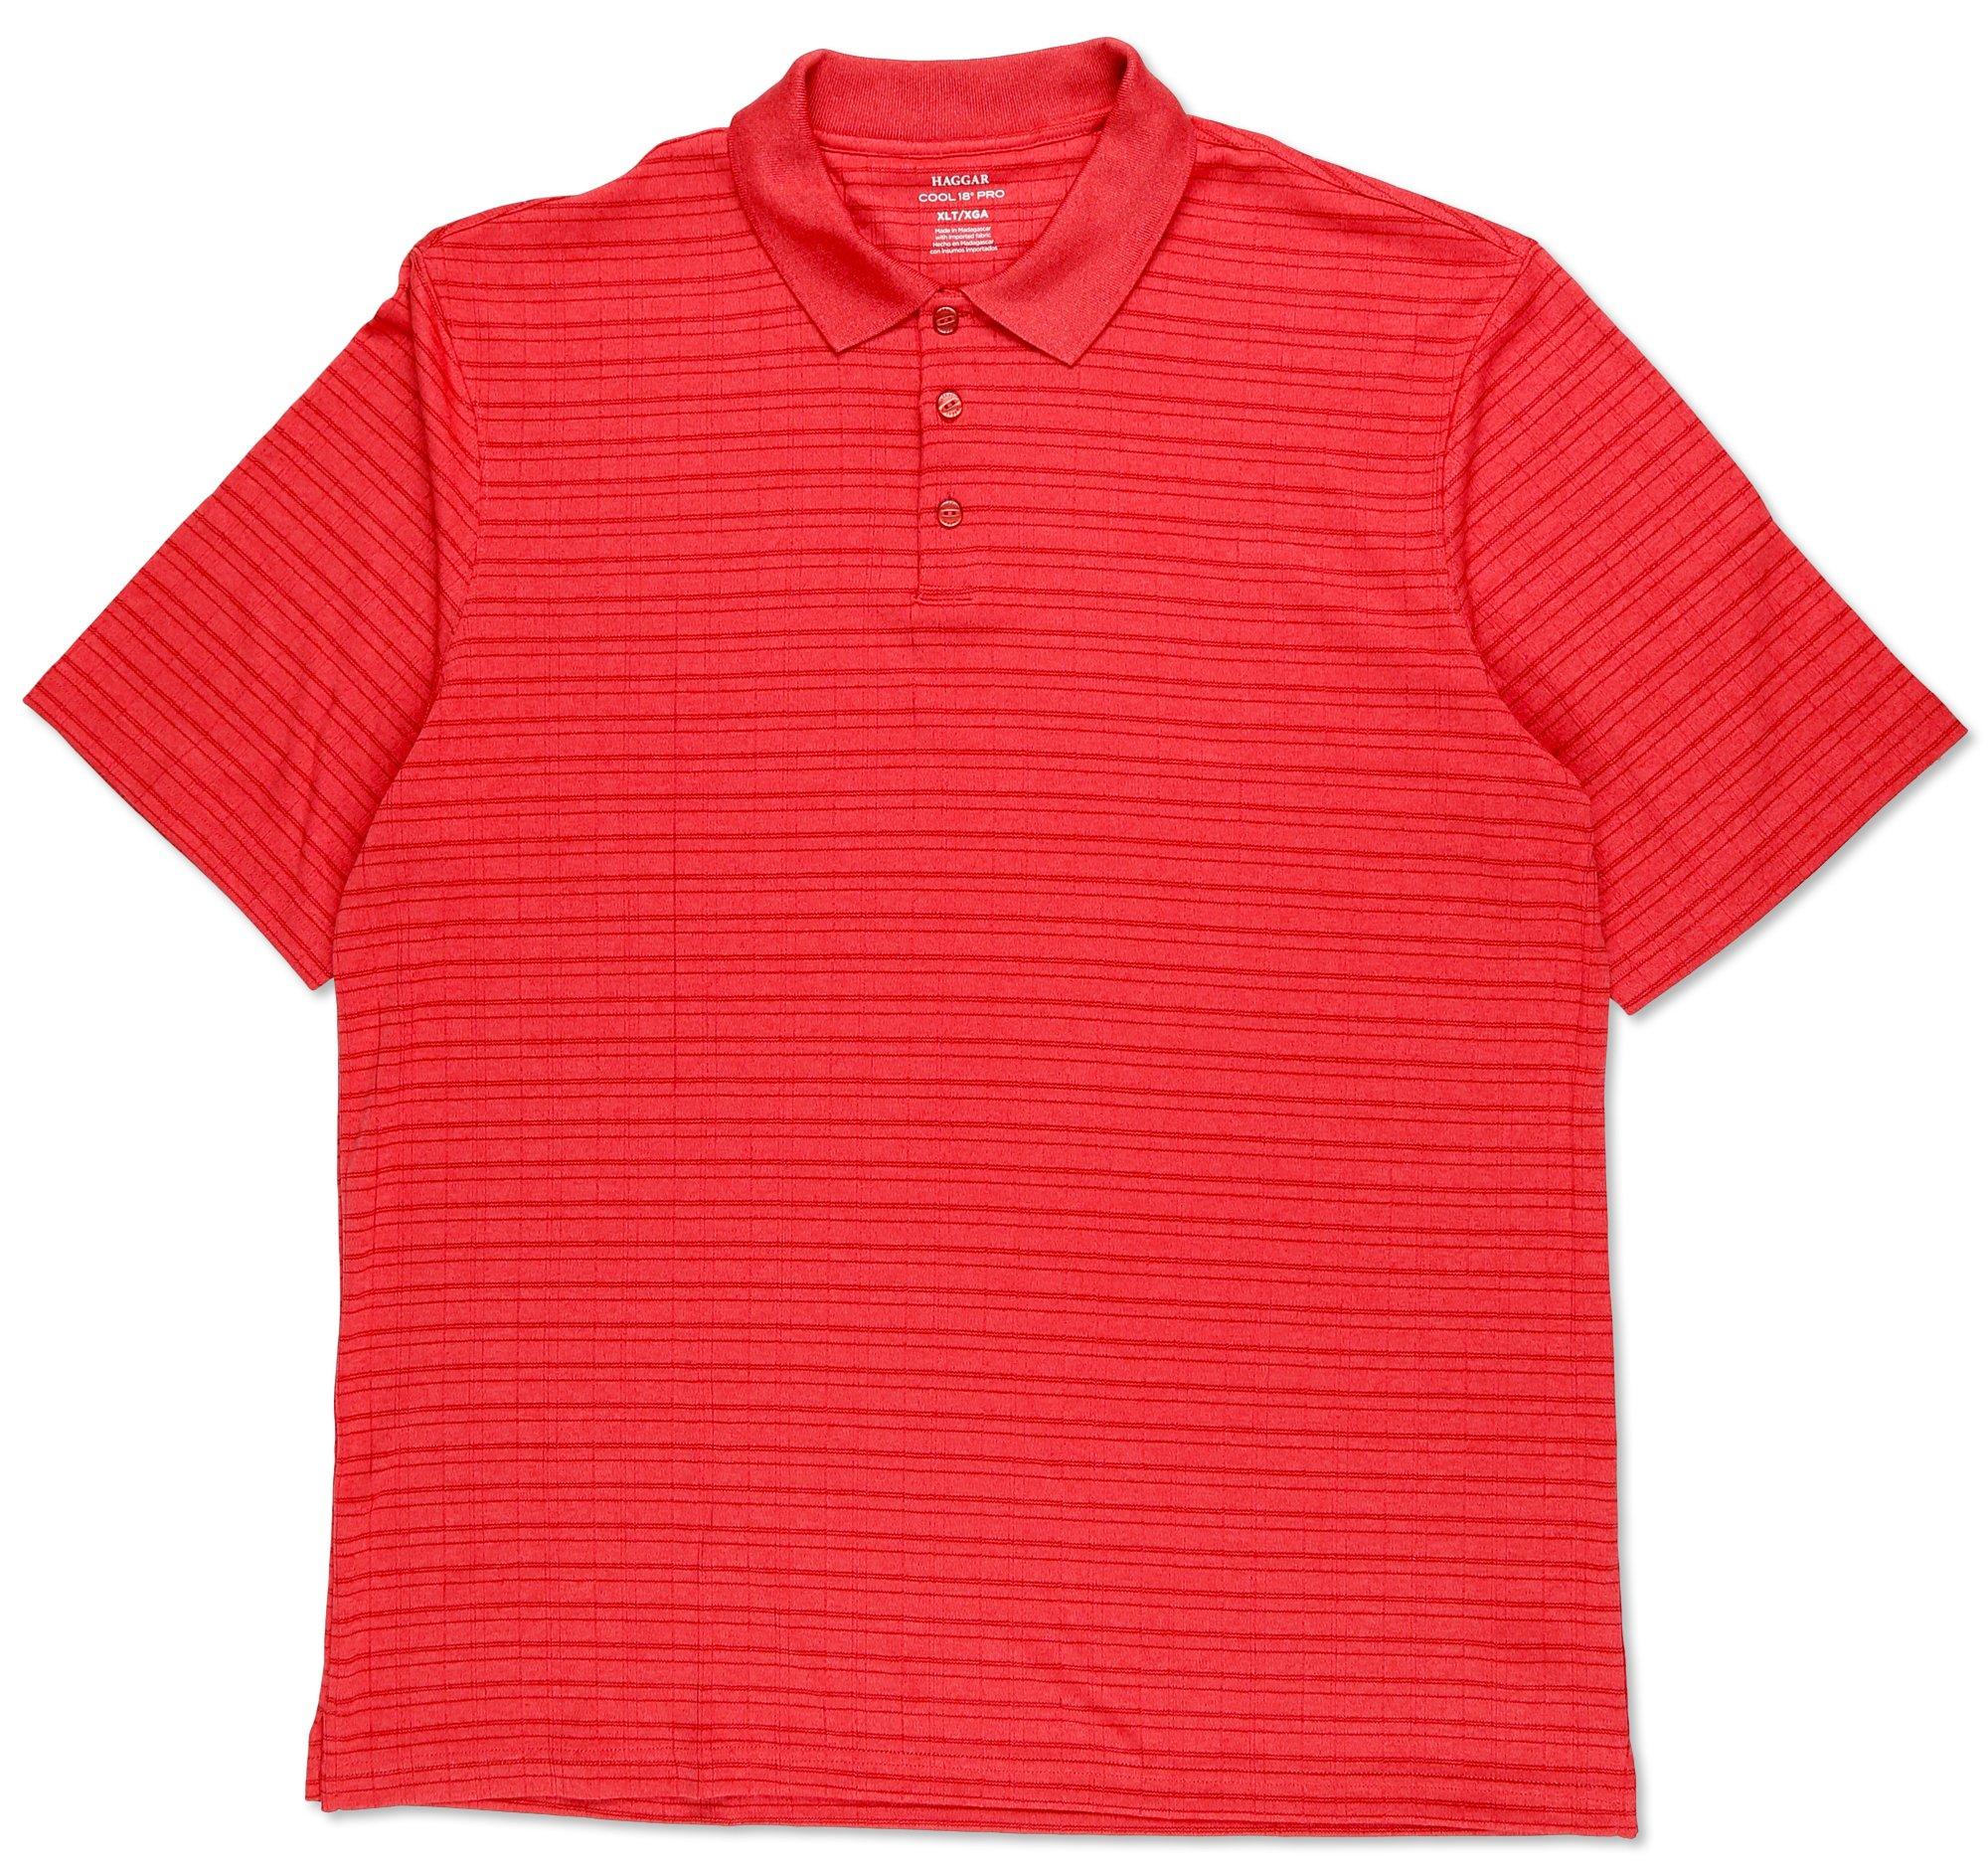 polo shirts outlet